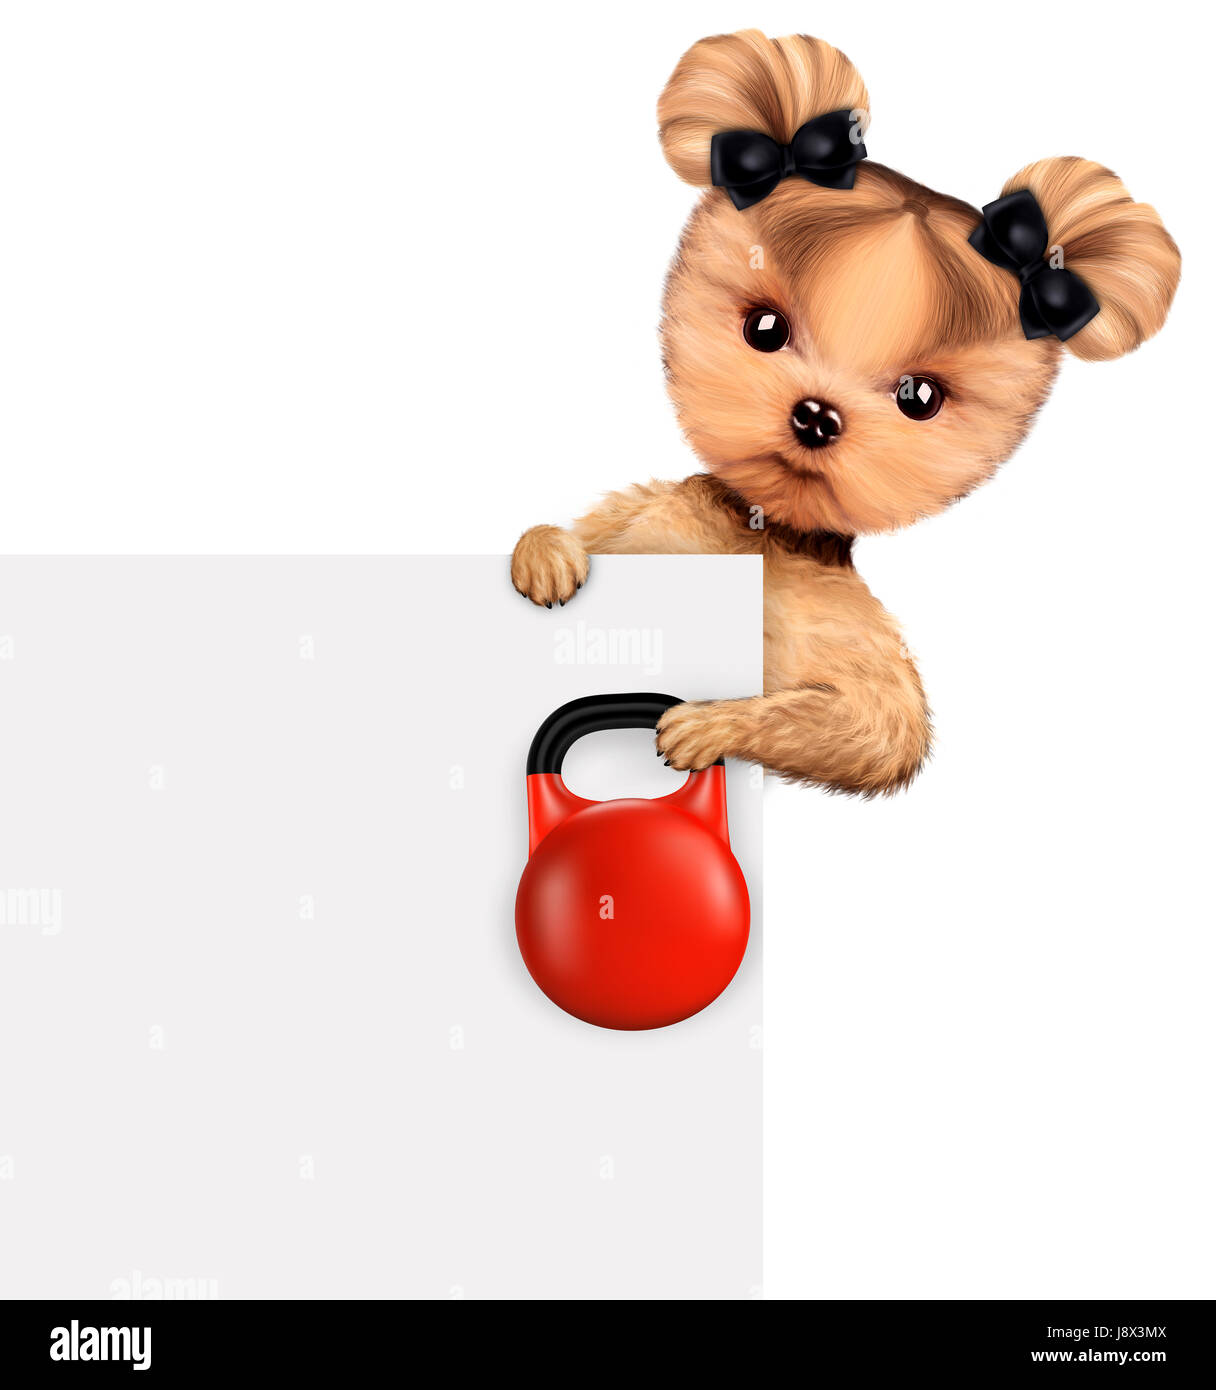 Funny dog training with kettlebell behind banner Stock Photo - Alamy